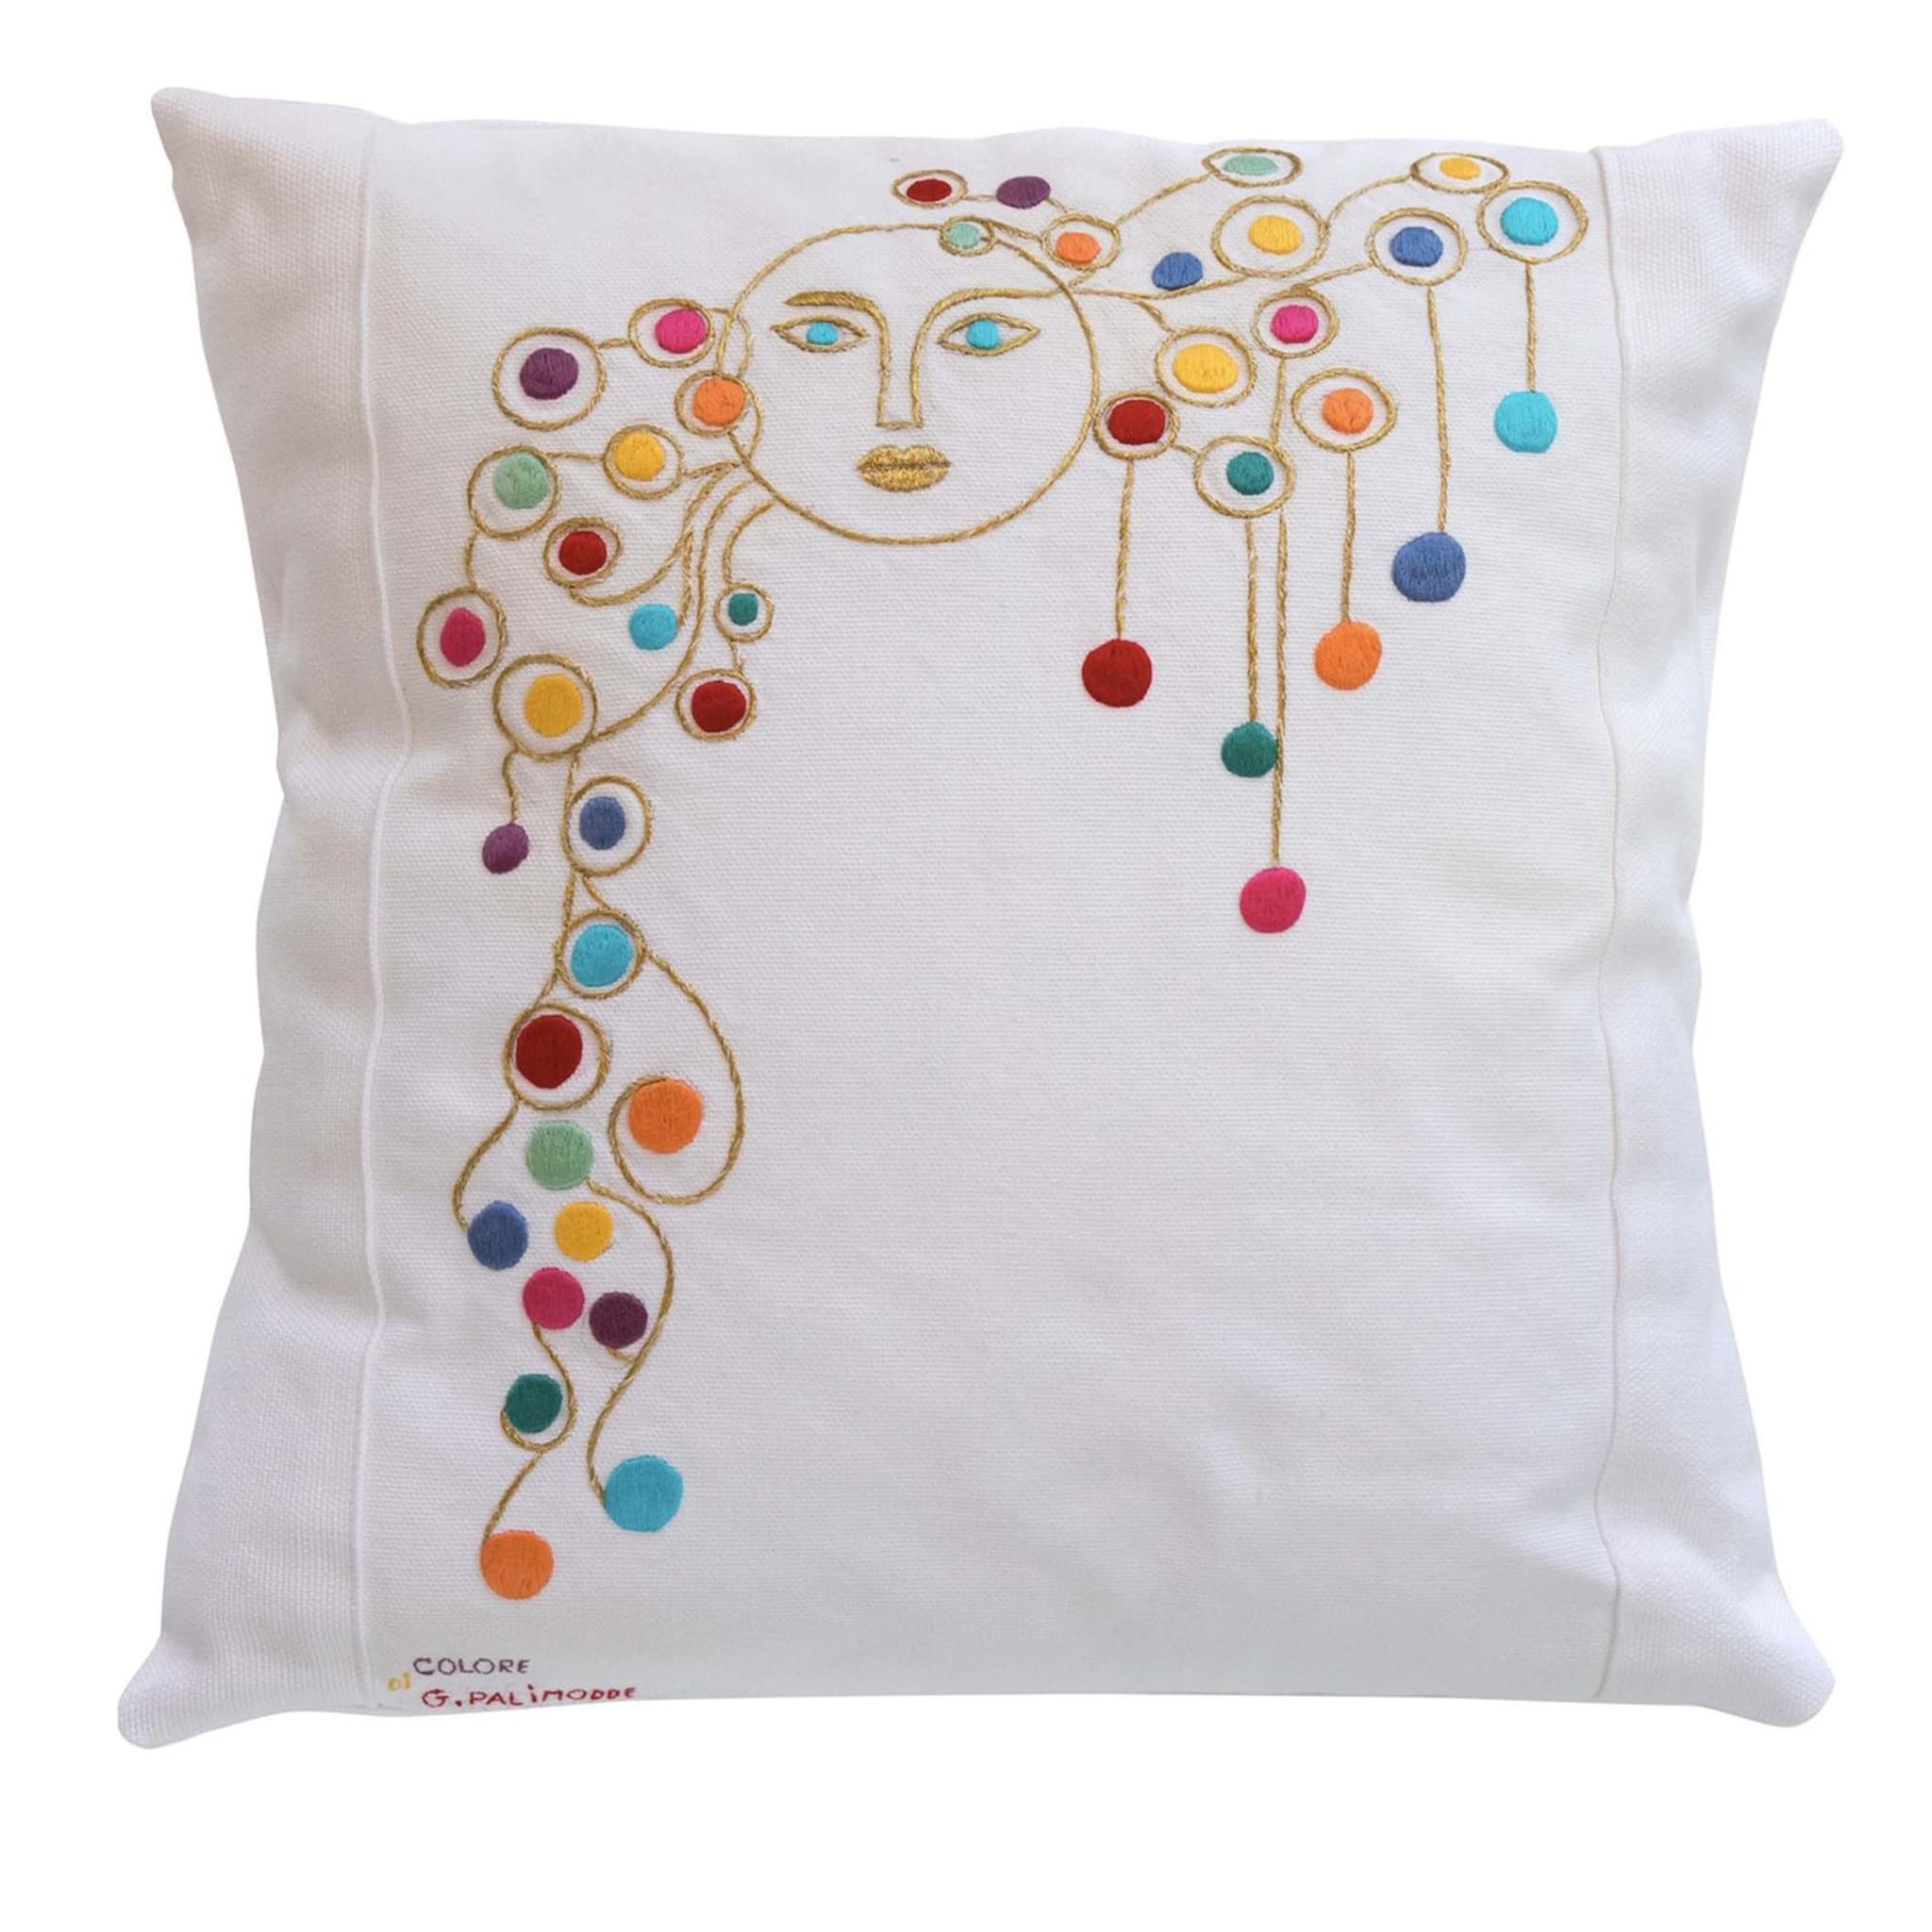 Embroidered Woman Cushion #2 - Main view